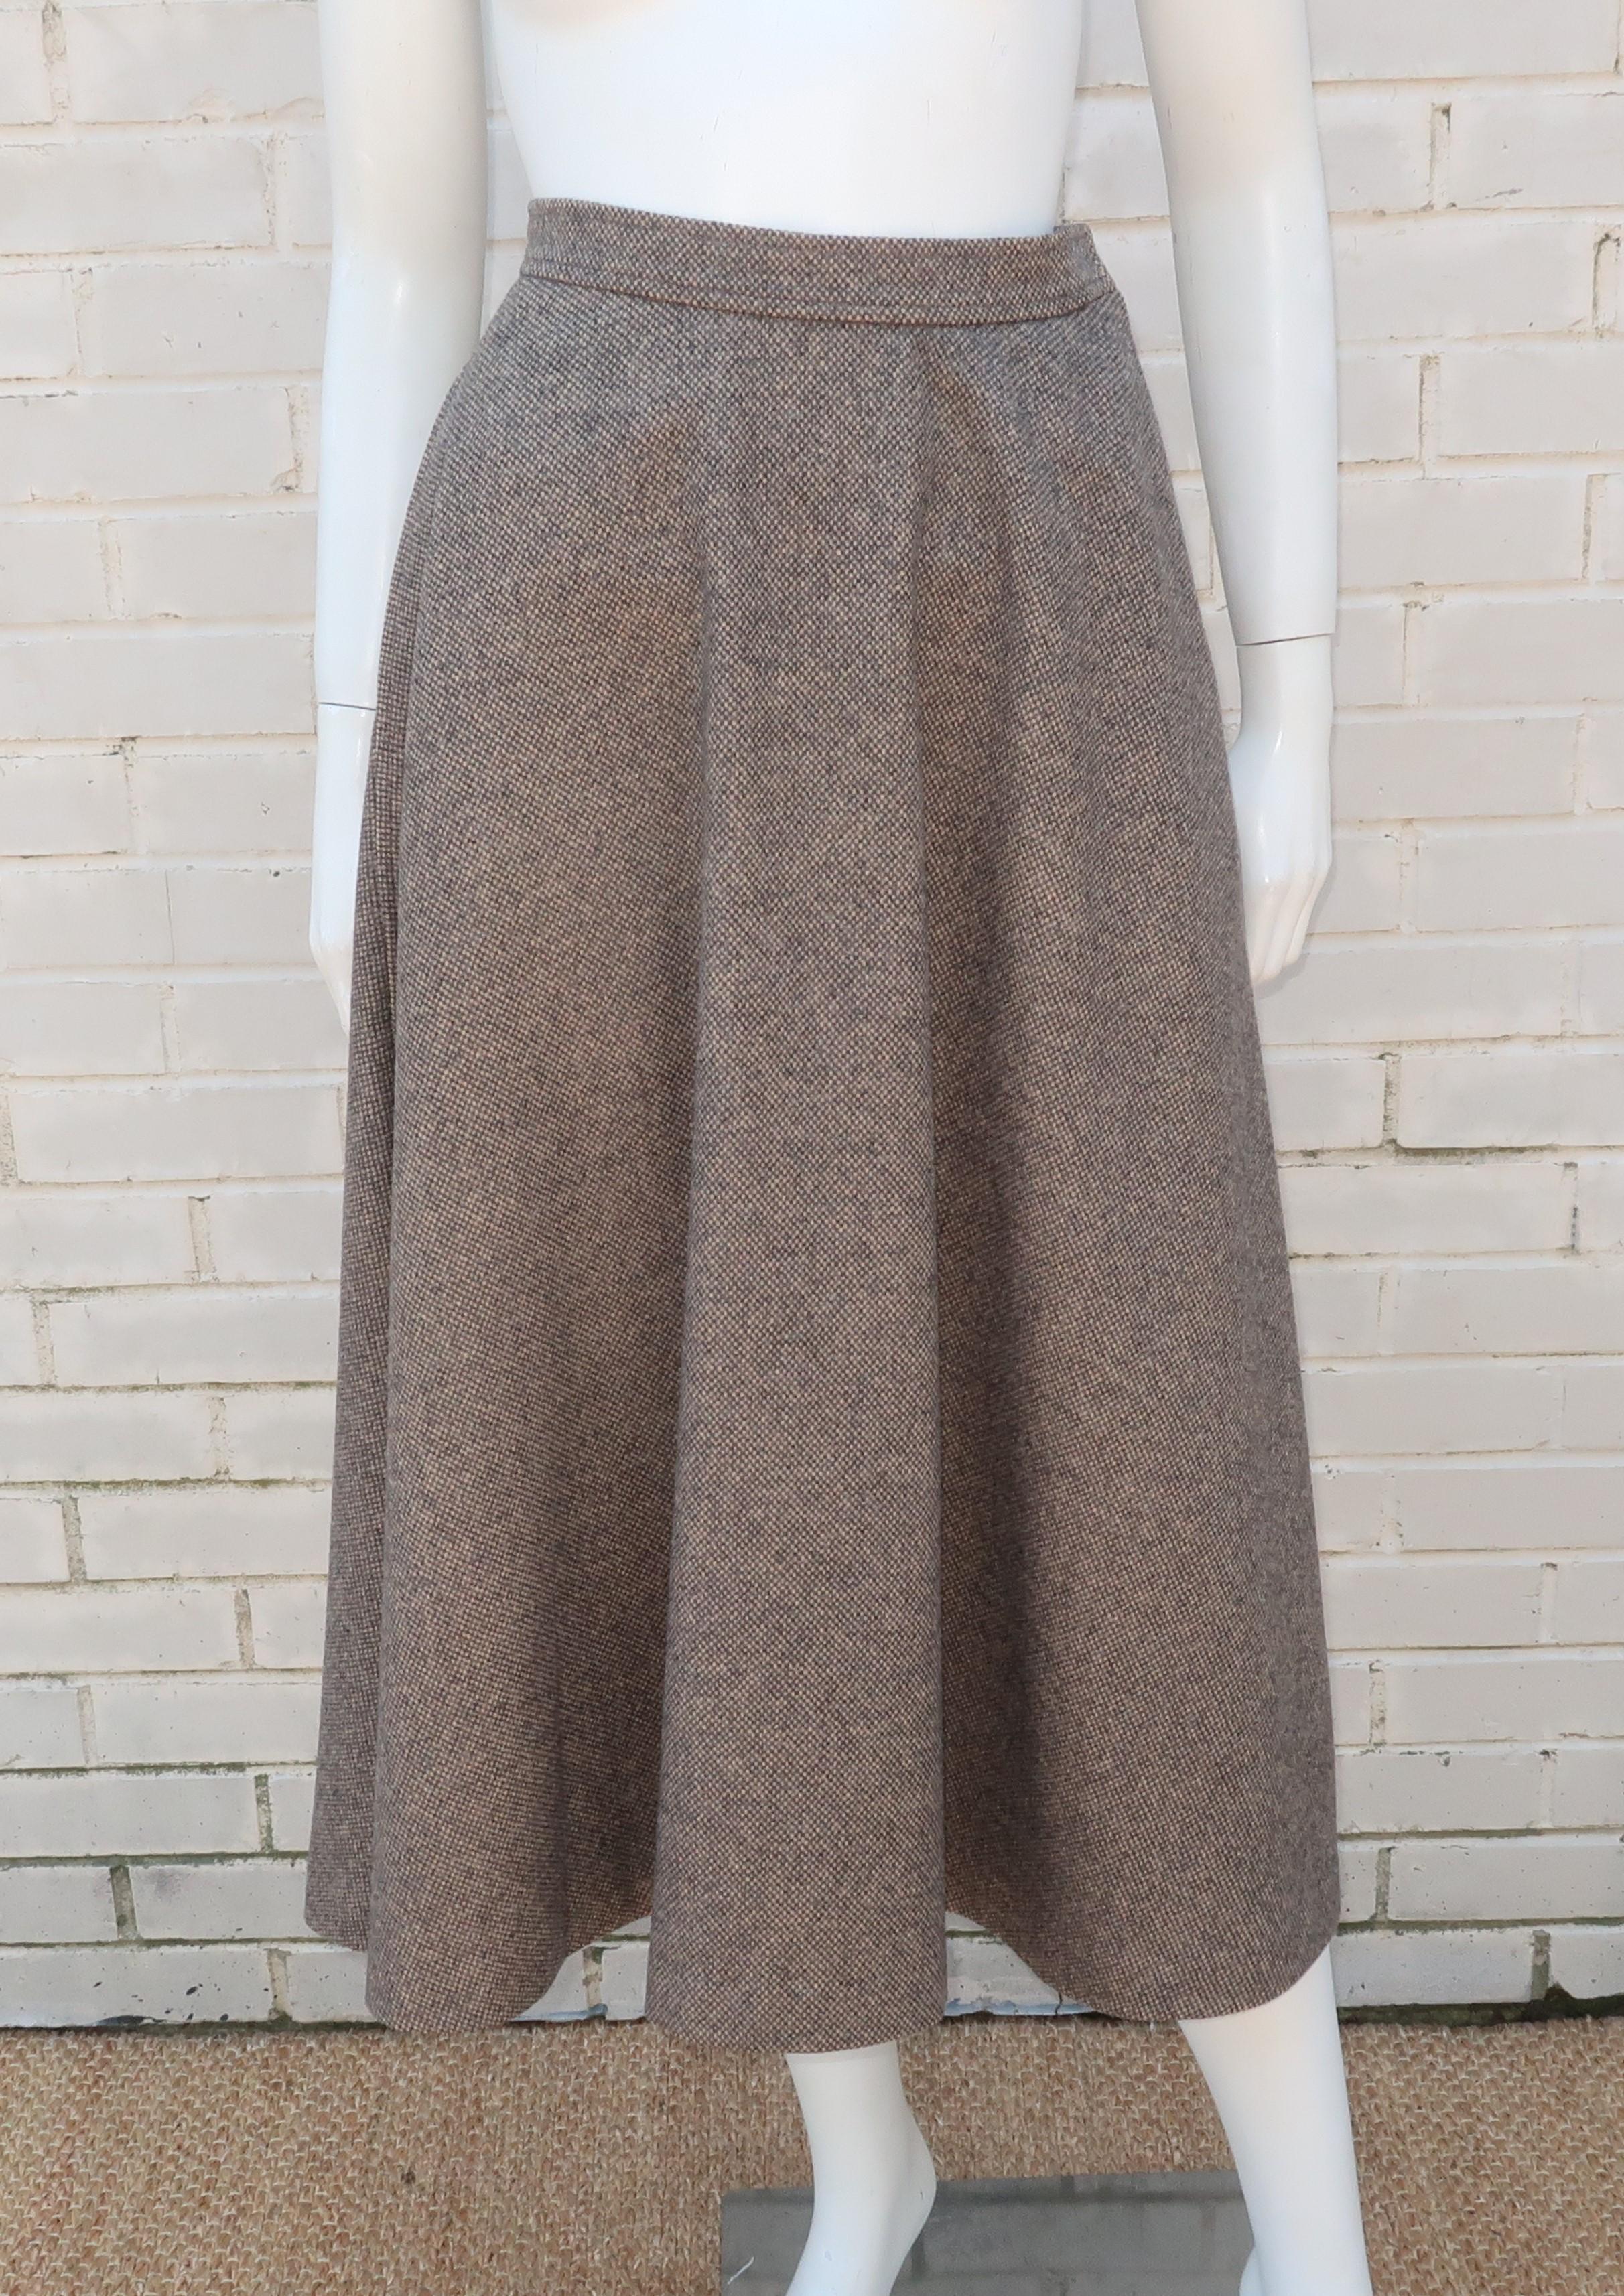 1970's Yves Saint Laurent wool tweed flared skirt in shades of gray and tan.  The skirt hooks and zips at the side with hidden pockets and no lining.  It promises to be a Fall and Winter wardrobe staple ... perfect paired with cropped jackets and